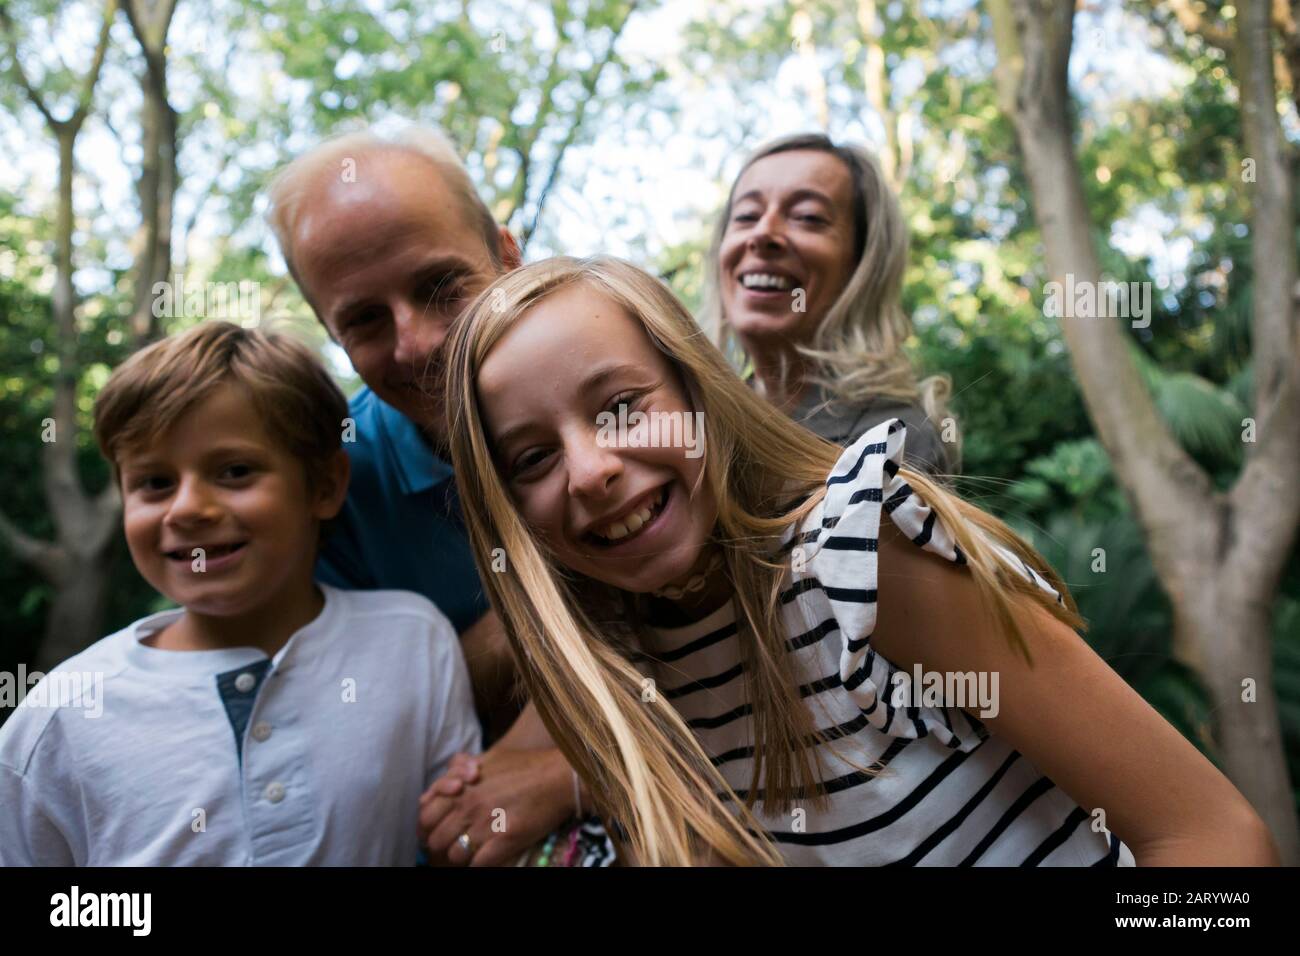 Family smiling by trees Stock Photo